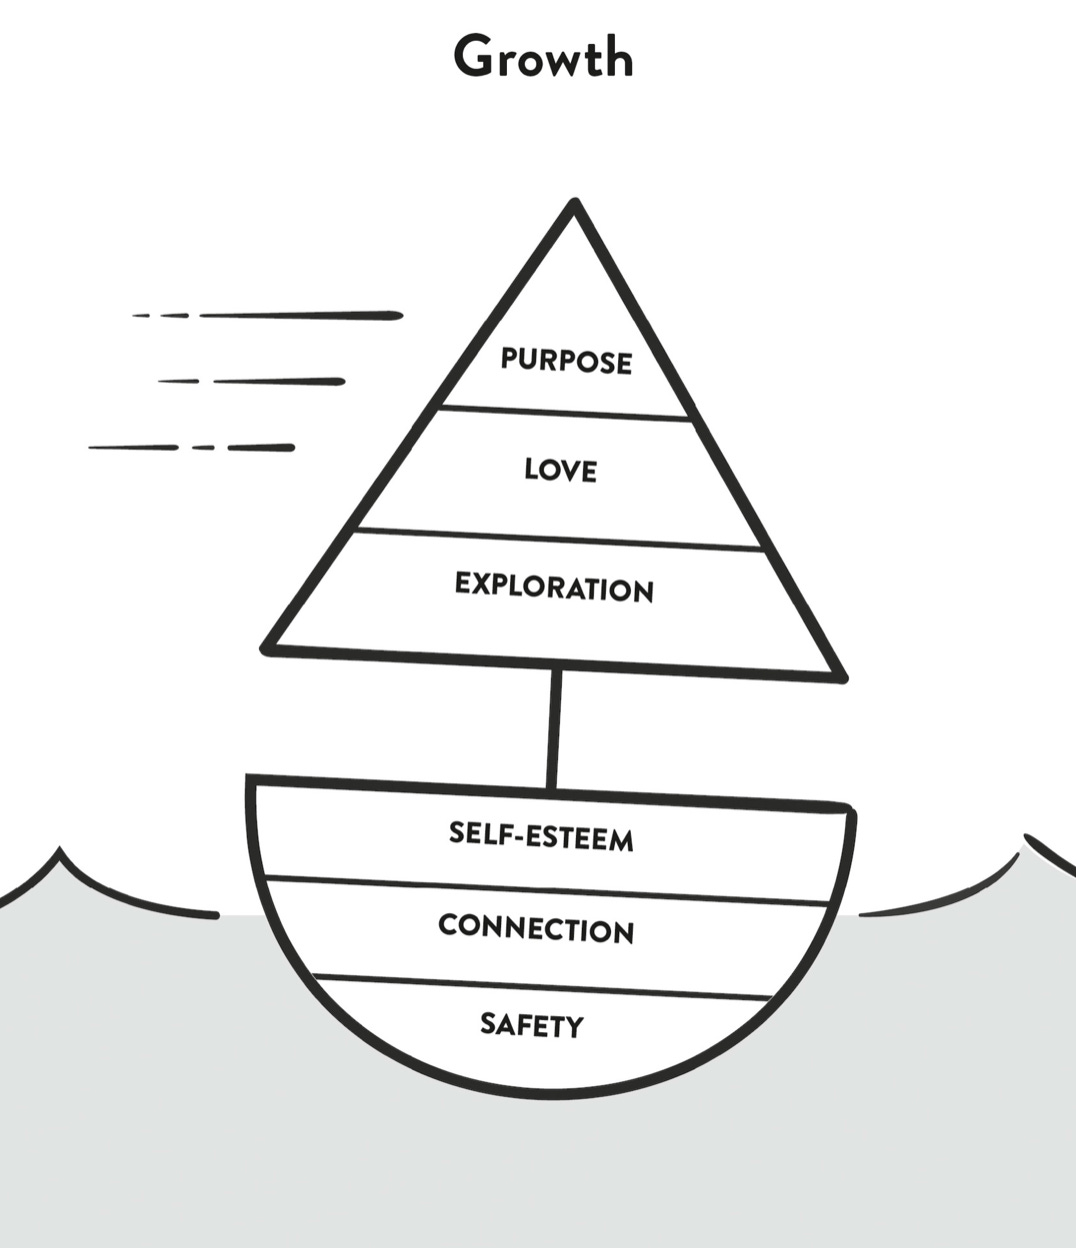 A new metaphor for Maslow’s hierarchy of needs